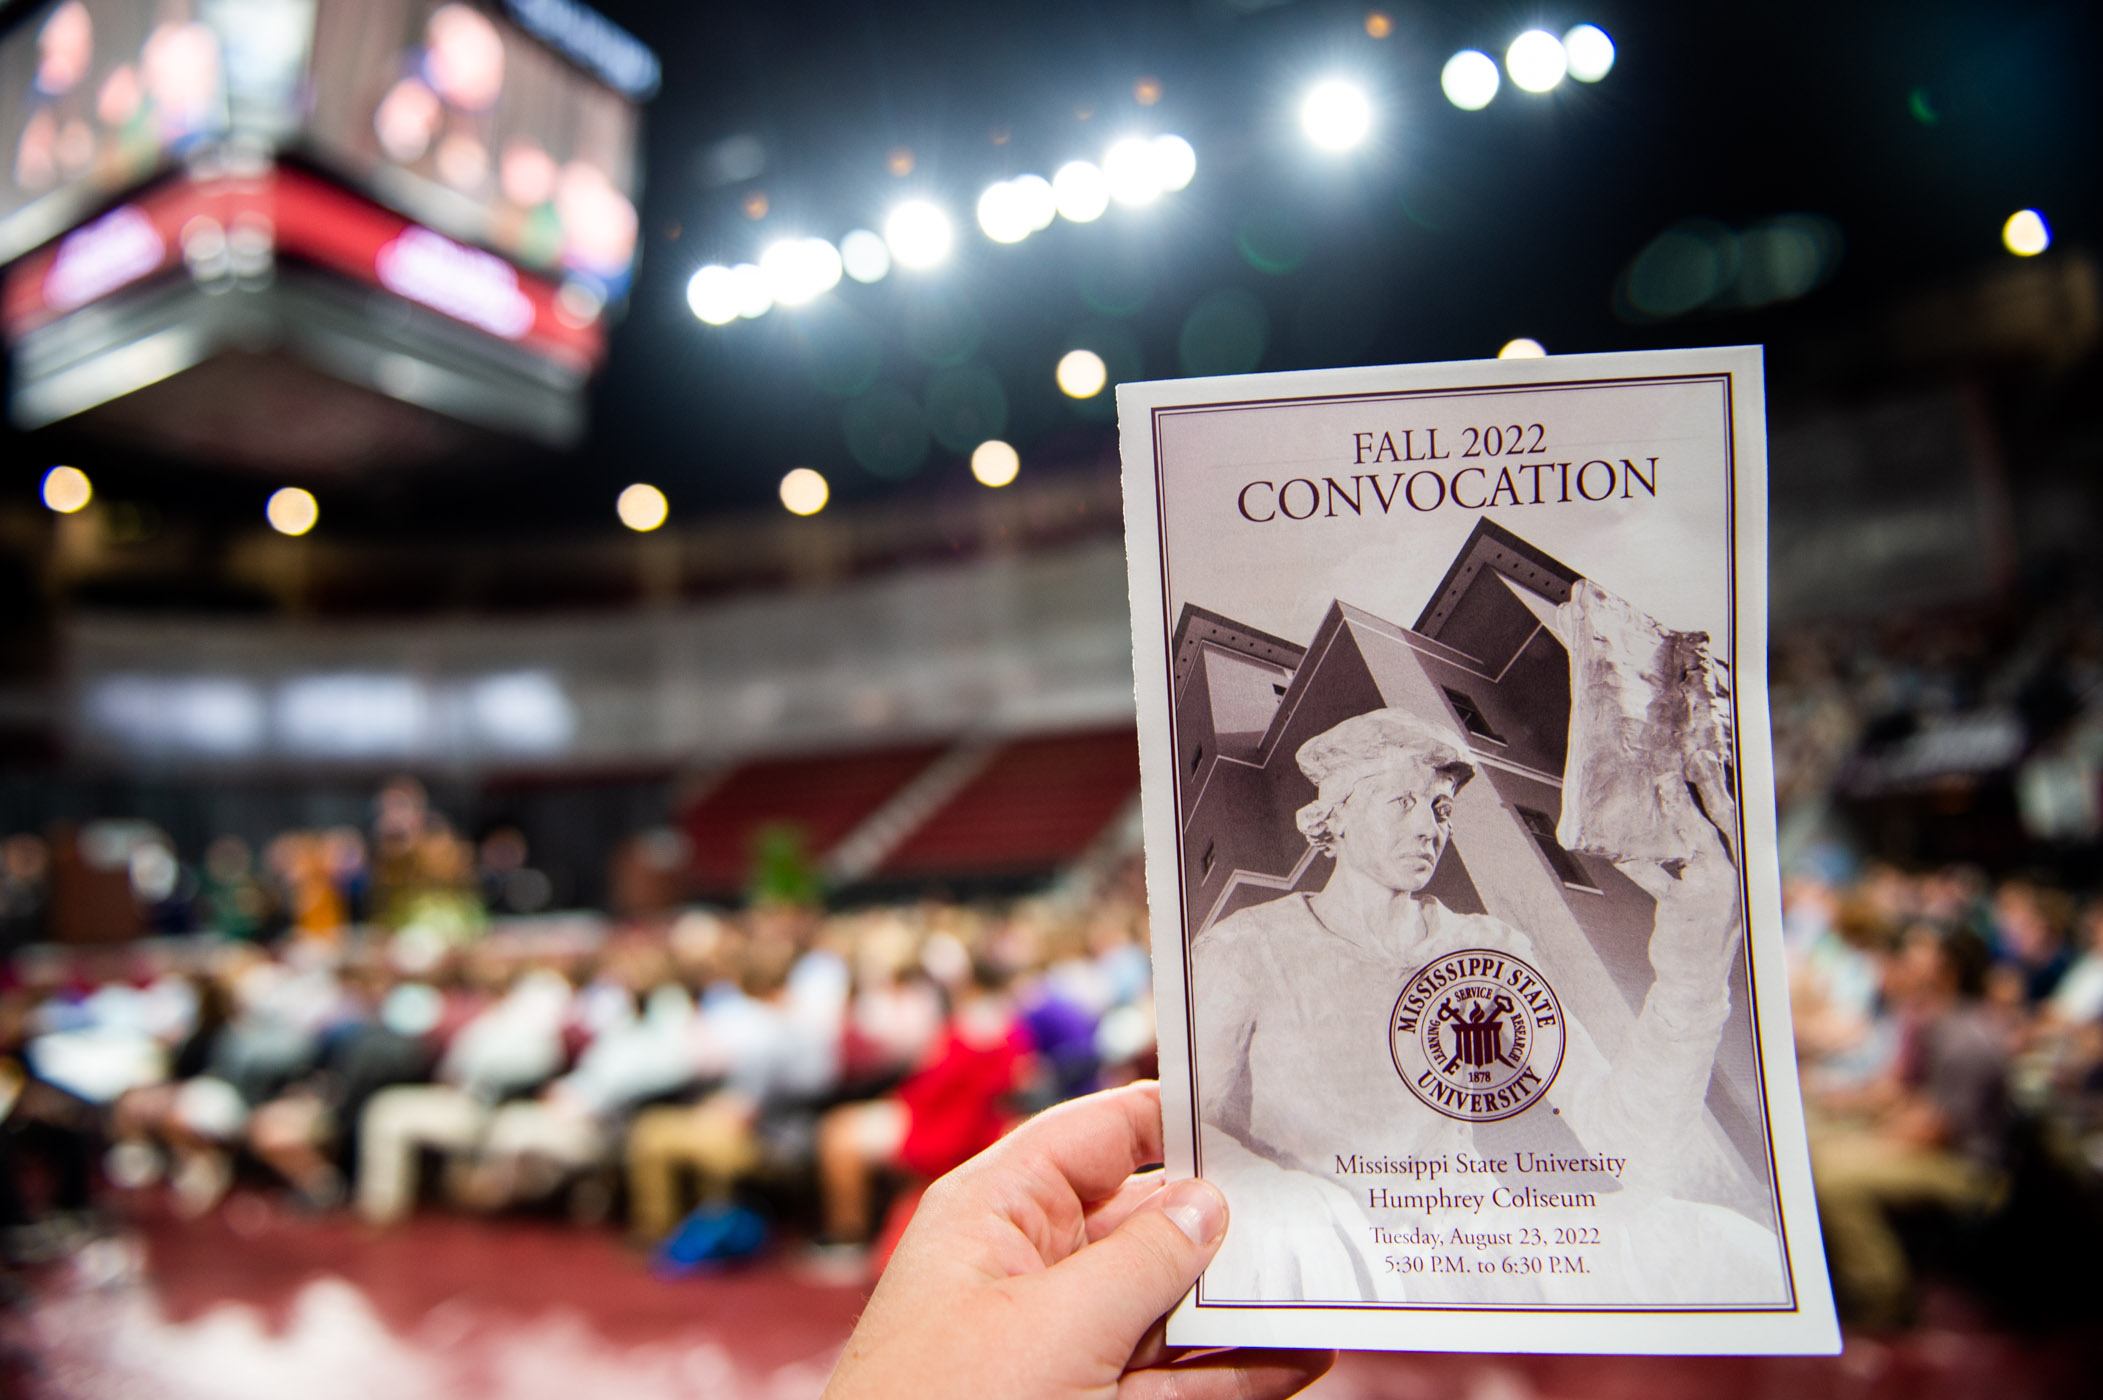 After a two-year delay due to the pandemic, fall convocation welcomes a packed house of new Bulldogs